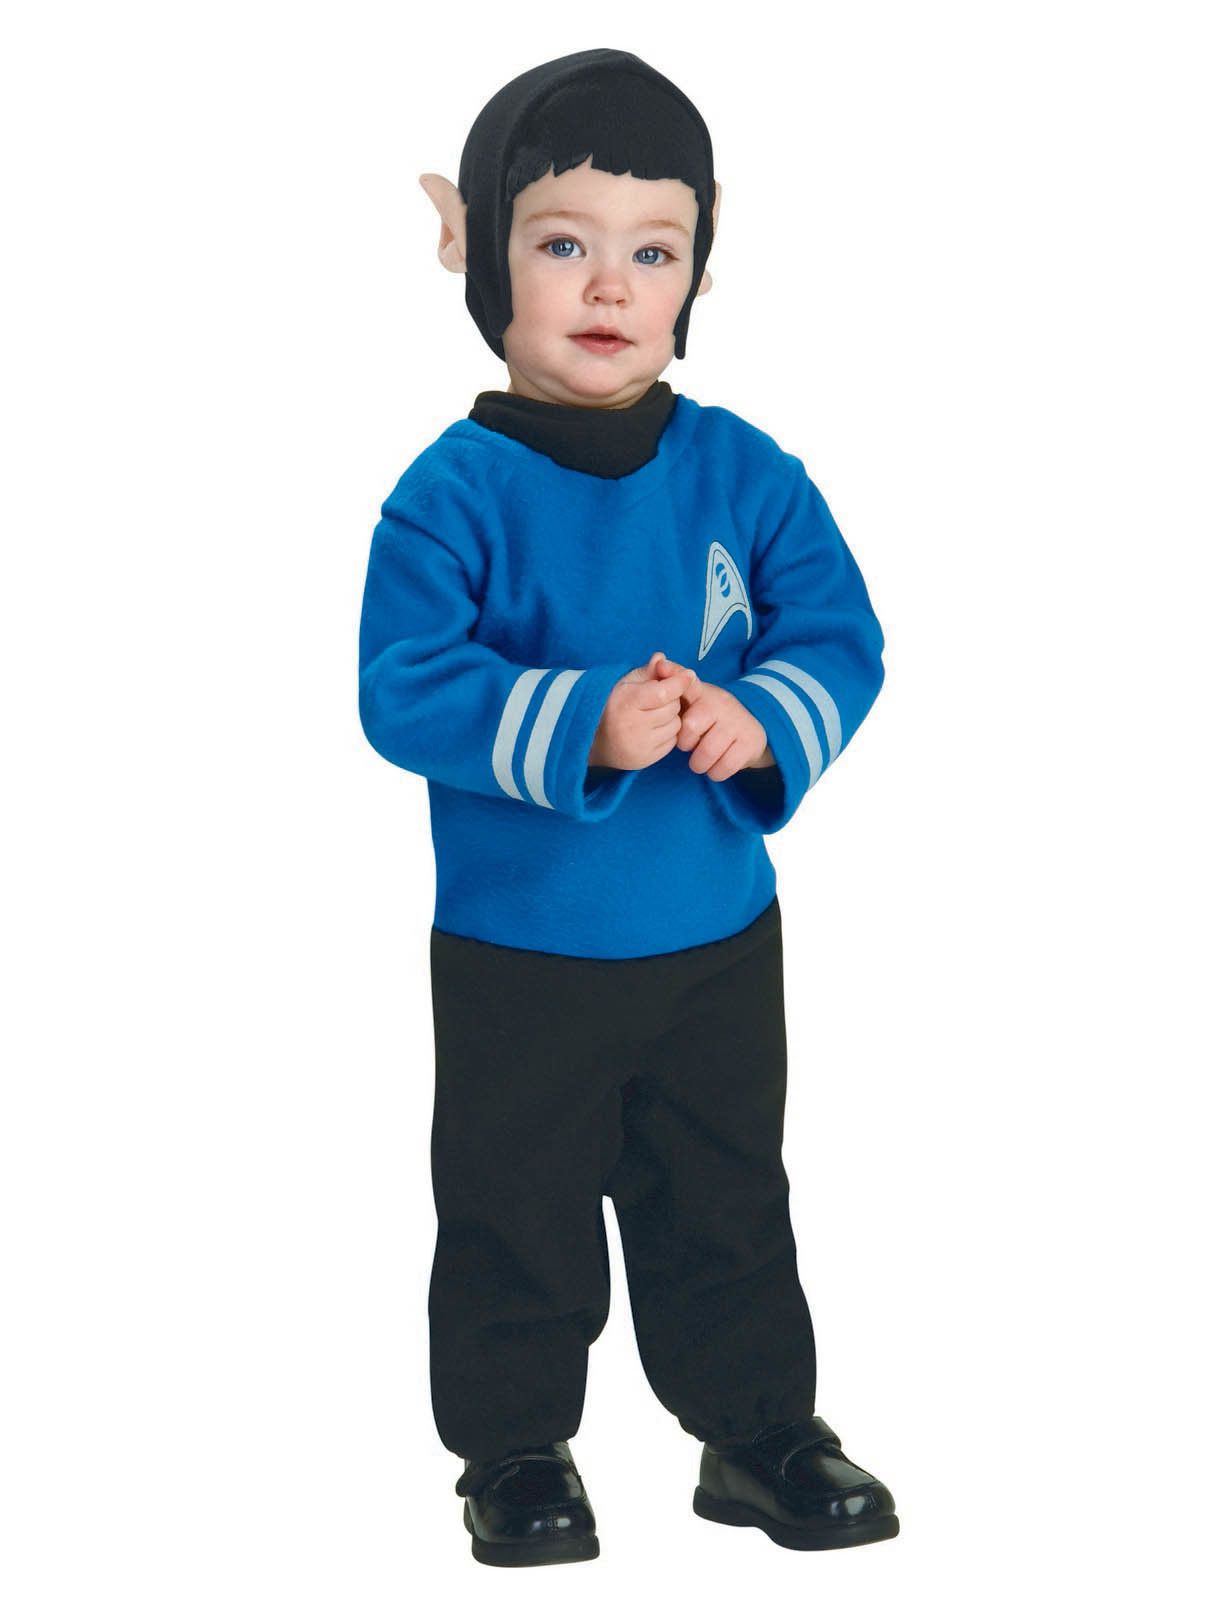 Baby/Toddler Star Trek II Spock Costume for Babies and Toddlers - costumes.com